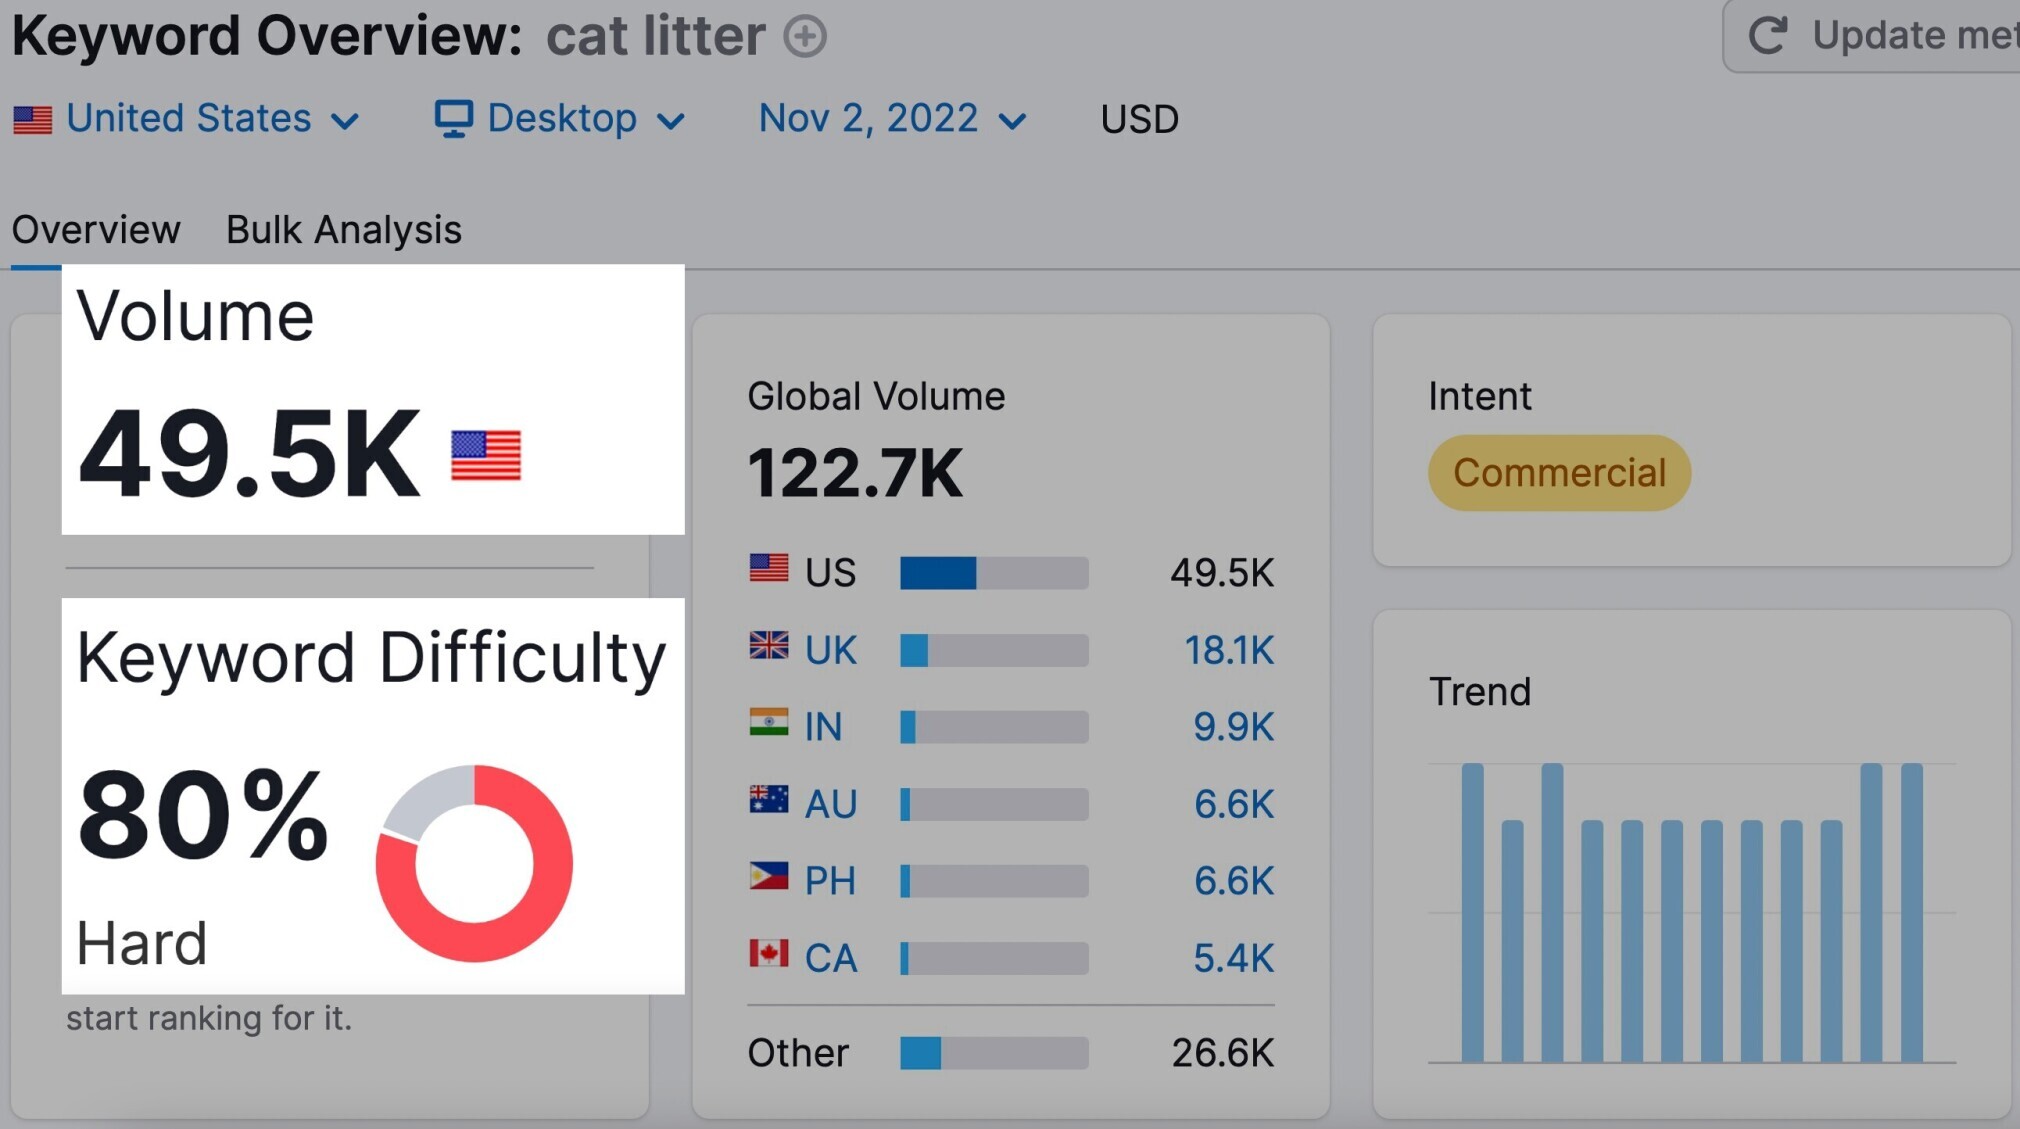 Keyword information from the keyword overview tool for the keyword "cat litter"